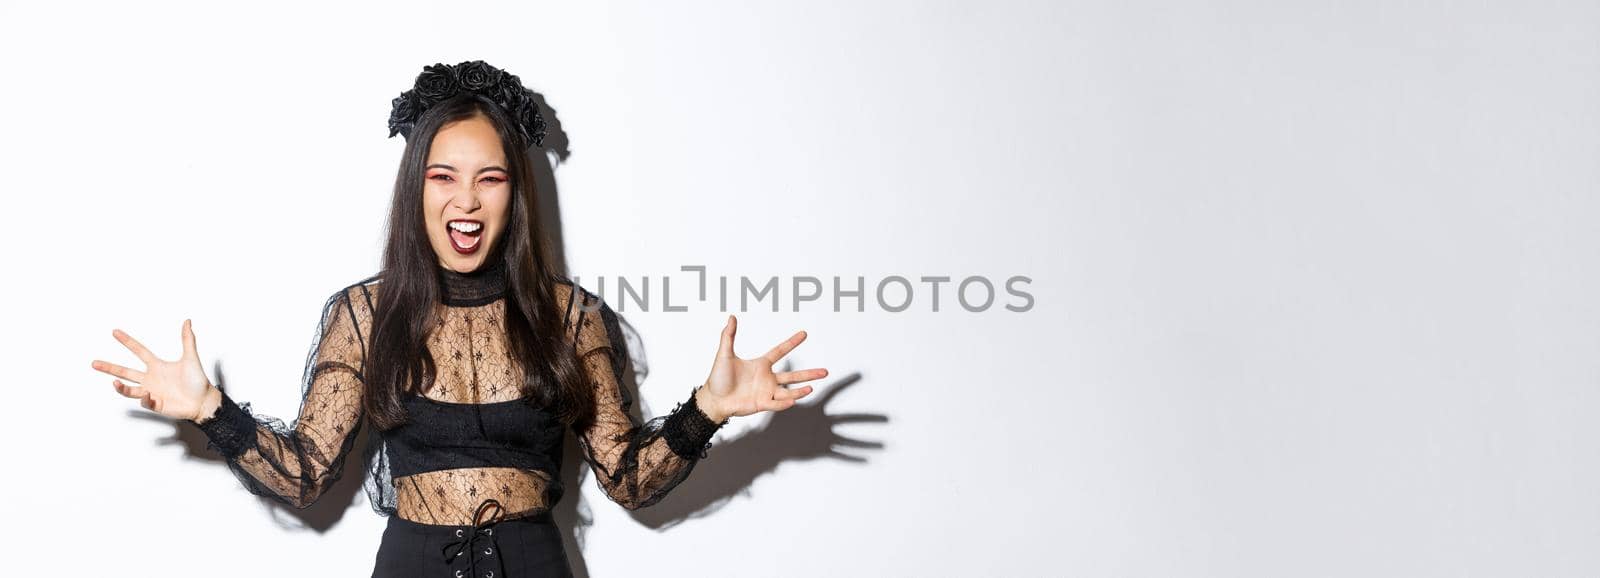 Woman screaming and looking scary in her halloween witch costume, spread hands sideways and looking angry, trying scare people during trick or treat, standing over white background.